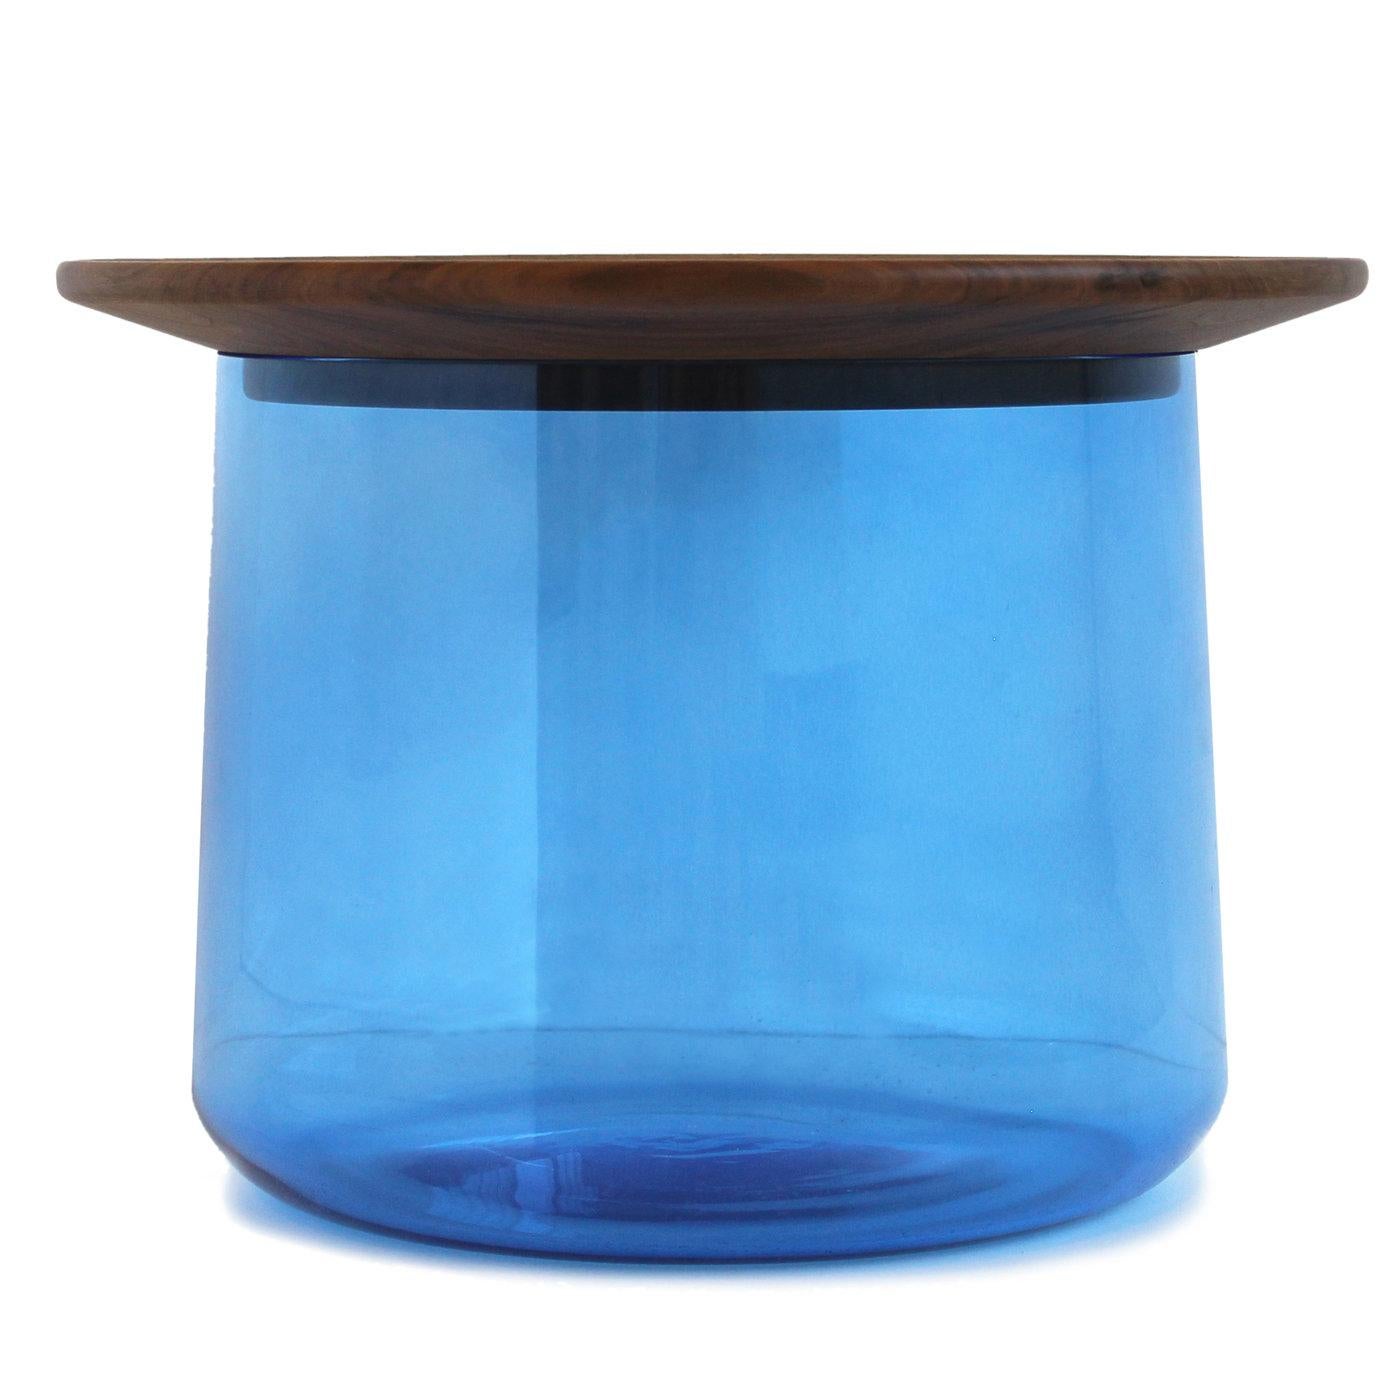 This striking coffee table is comprised of a large bottom vase in colored glass (that can function as container or storage space), and a top in solid 